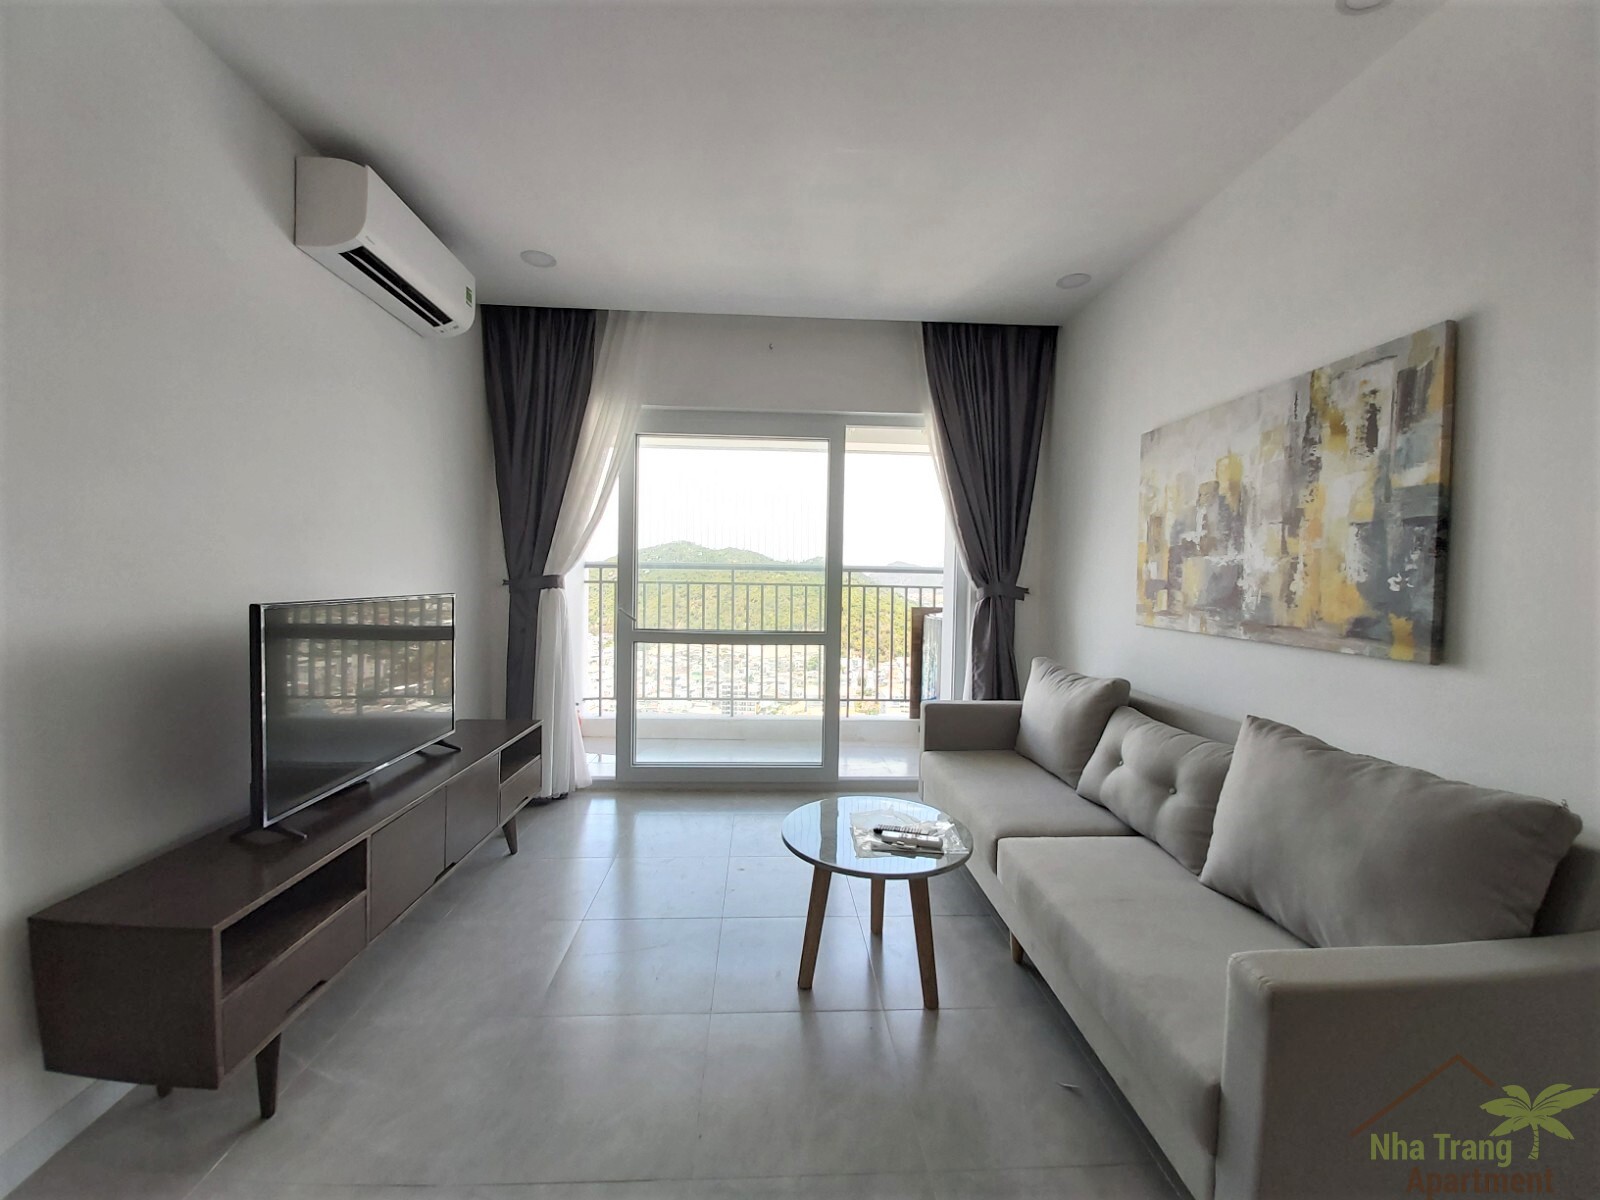 New apartment 2 bedroom for rent in OC3 Muong Thanh Oceanus A410